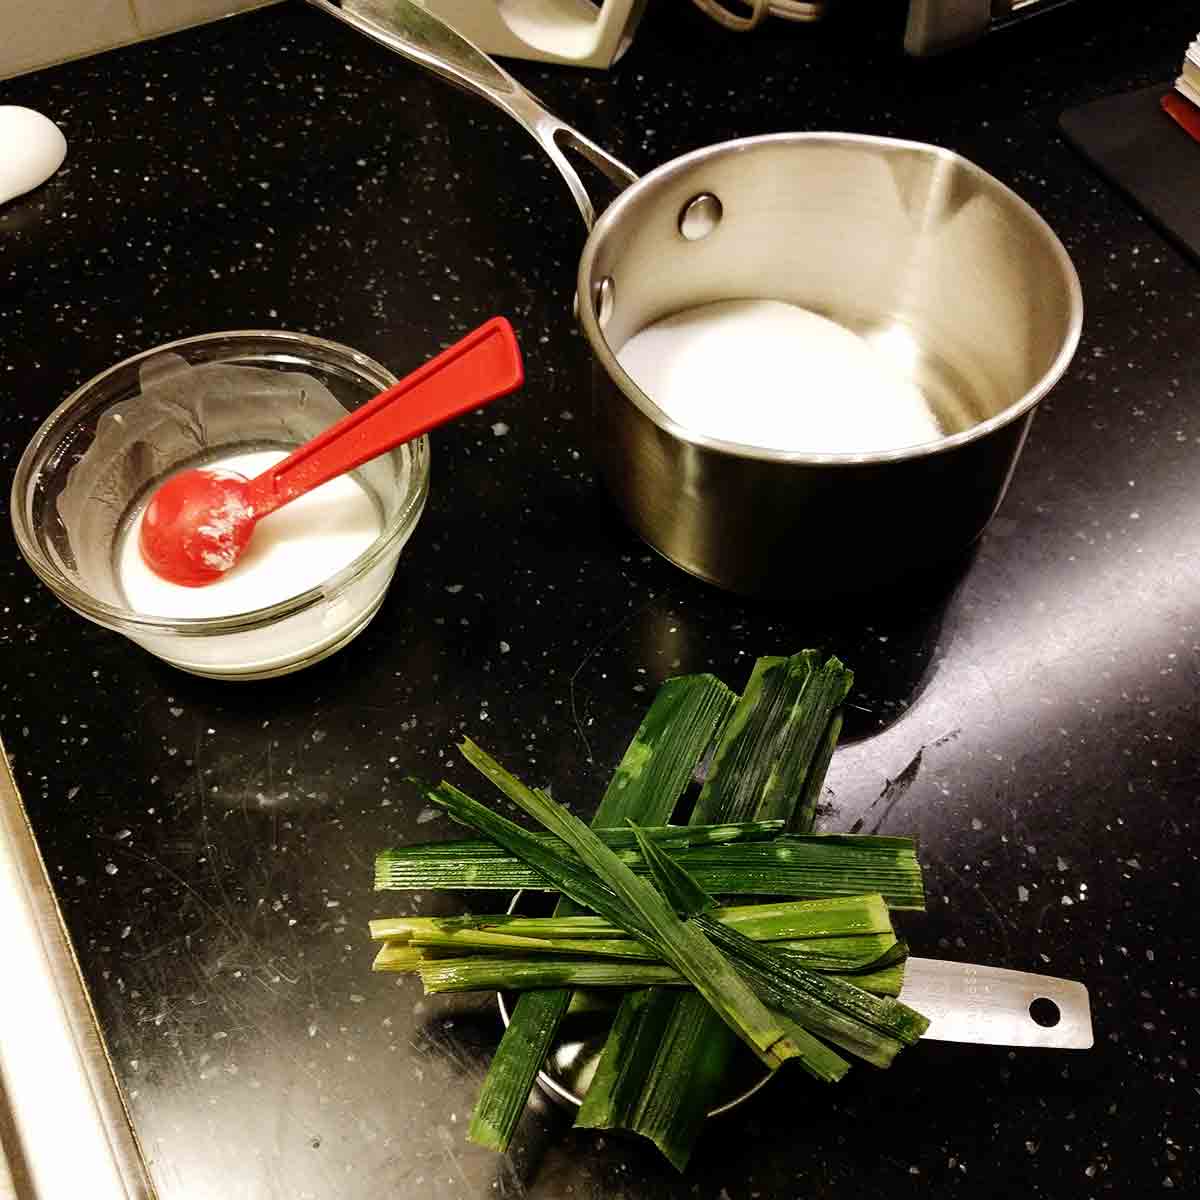 Kaya recipe, showing the corn starch mixture in a bowl, the sugar in a saucepan, and the pandan leaves.